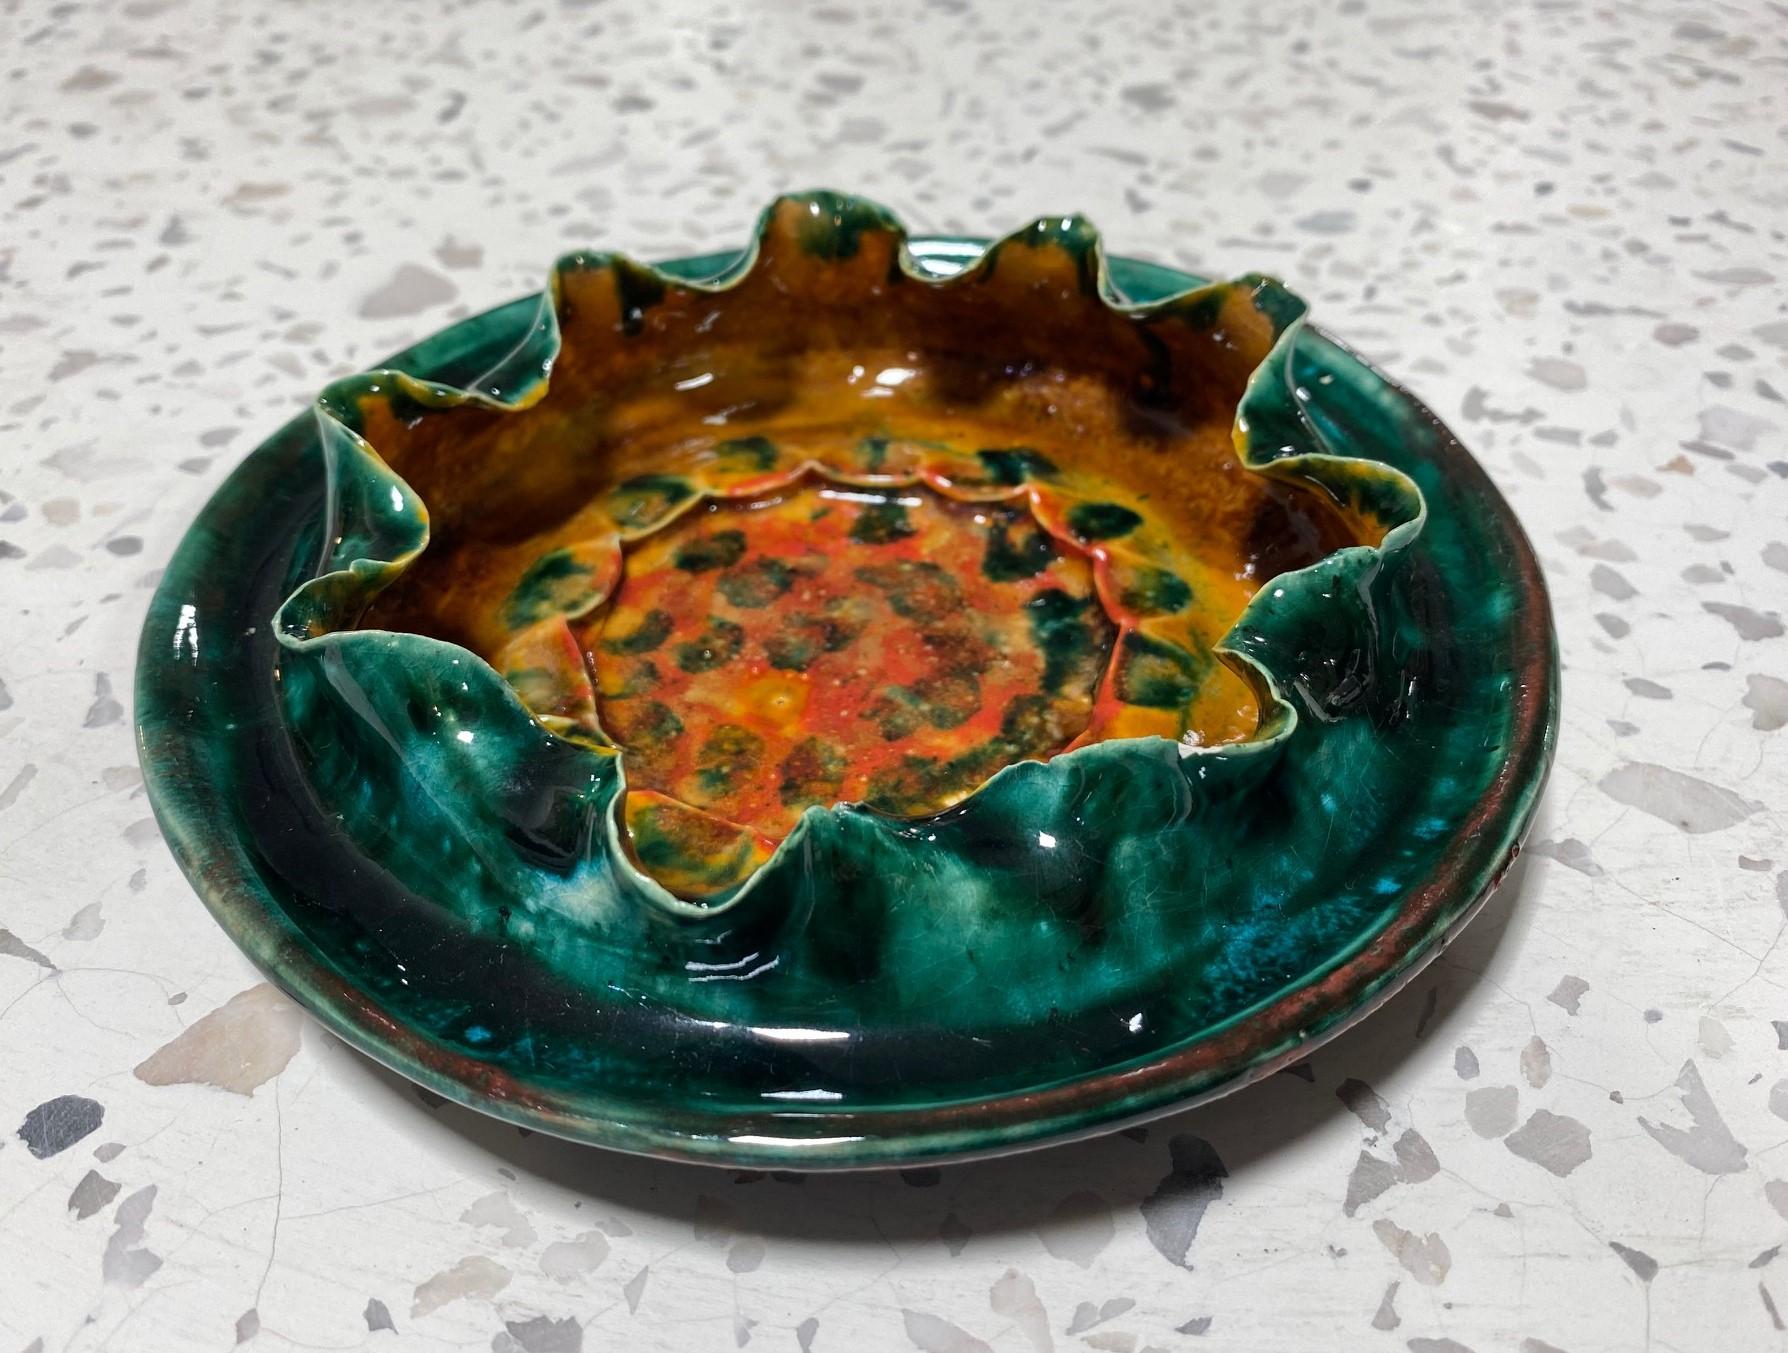 A wonderfully designed and glazed bowl by renowned American/ Mississippian potter George E. Ohr. ( or as he famously referred to himself as the 